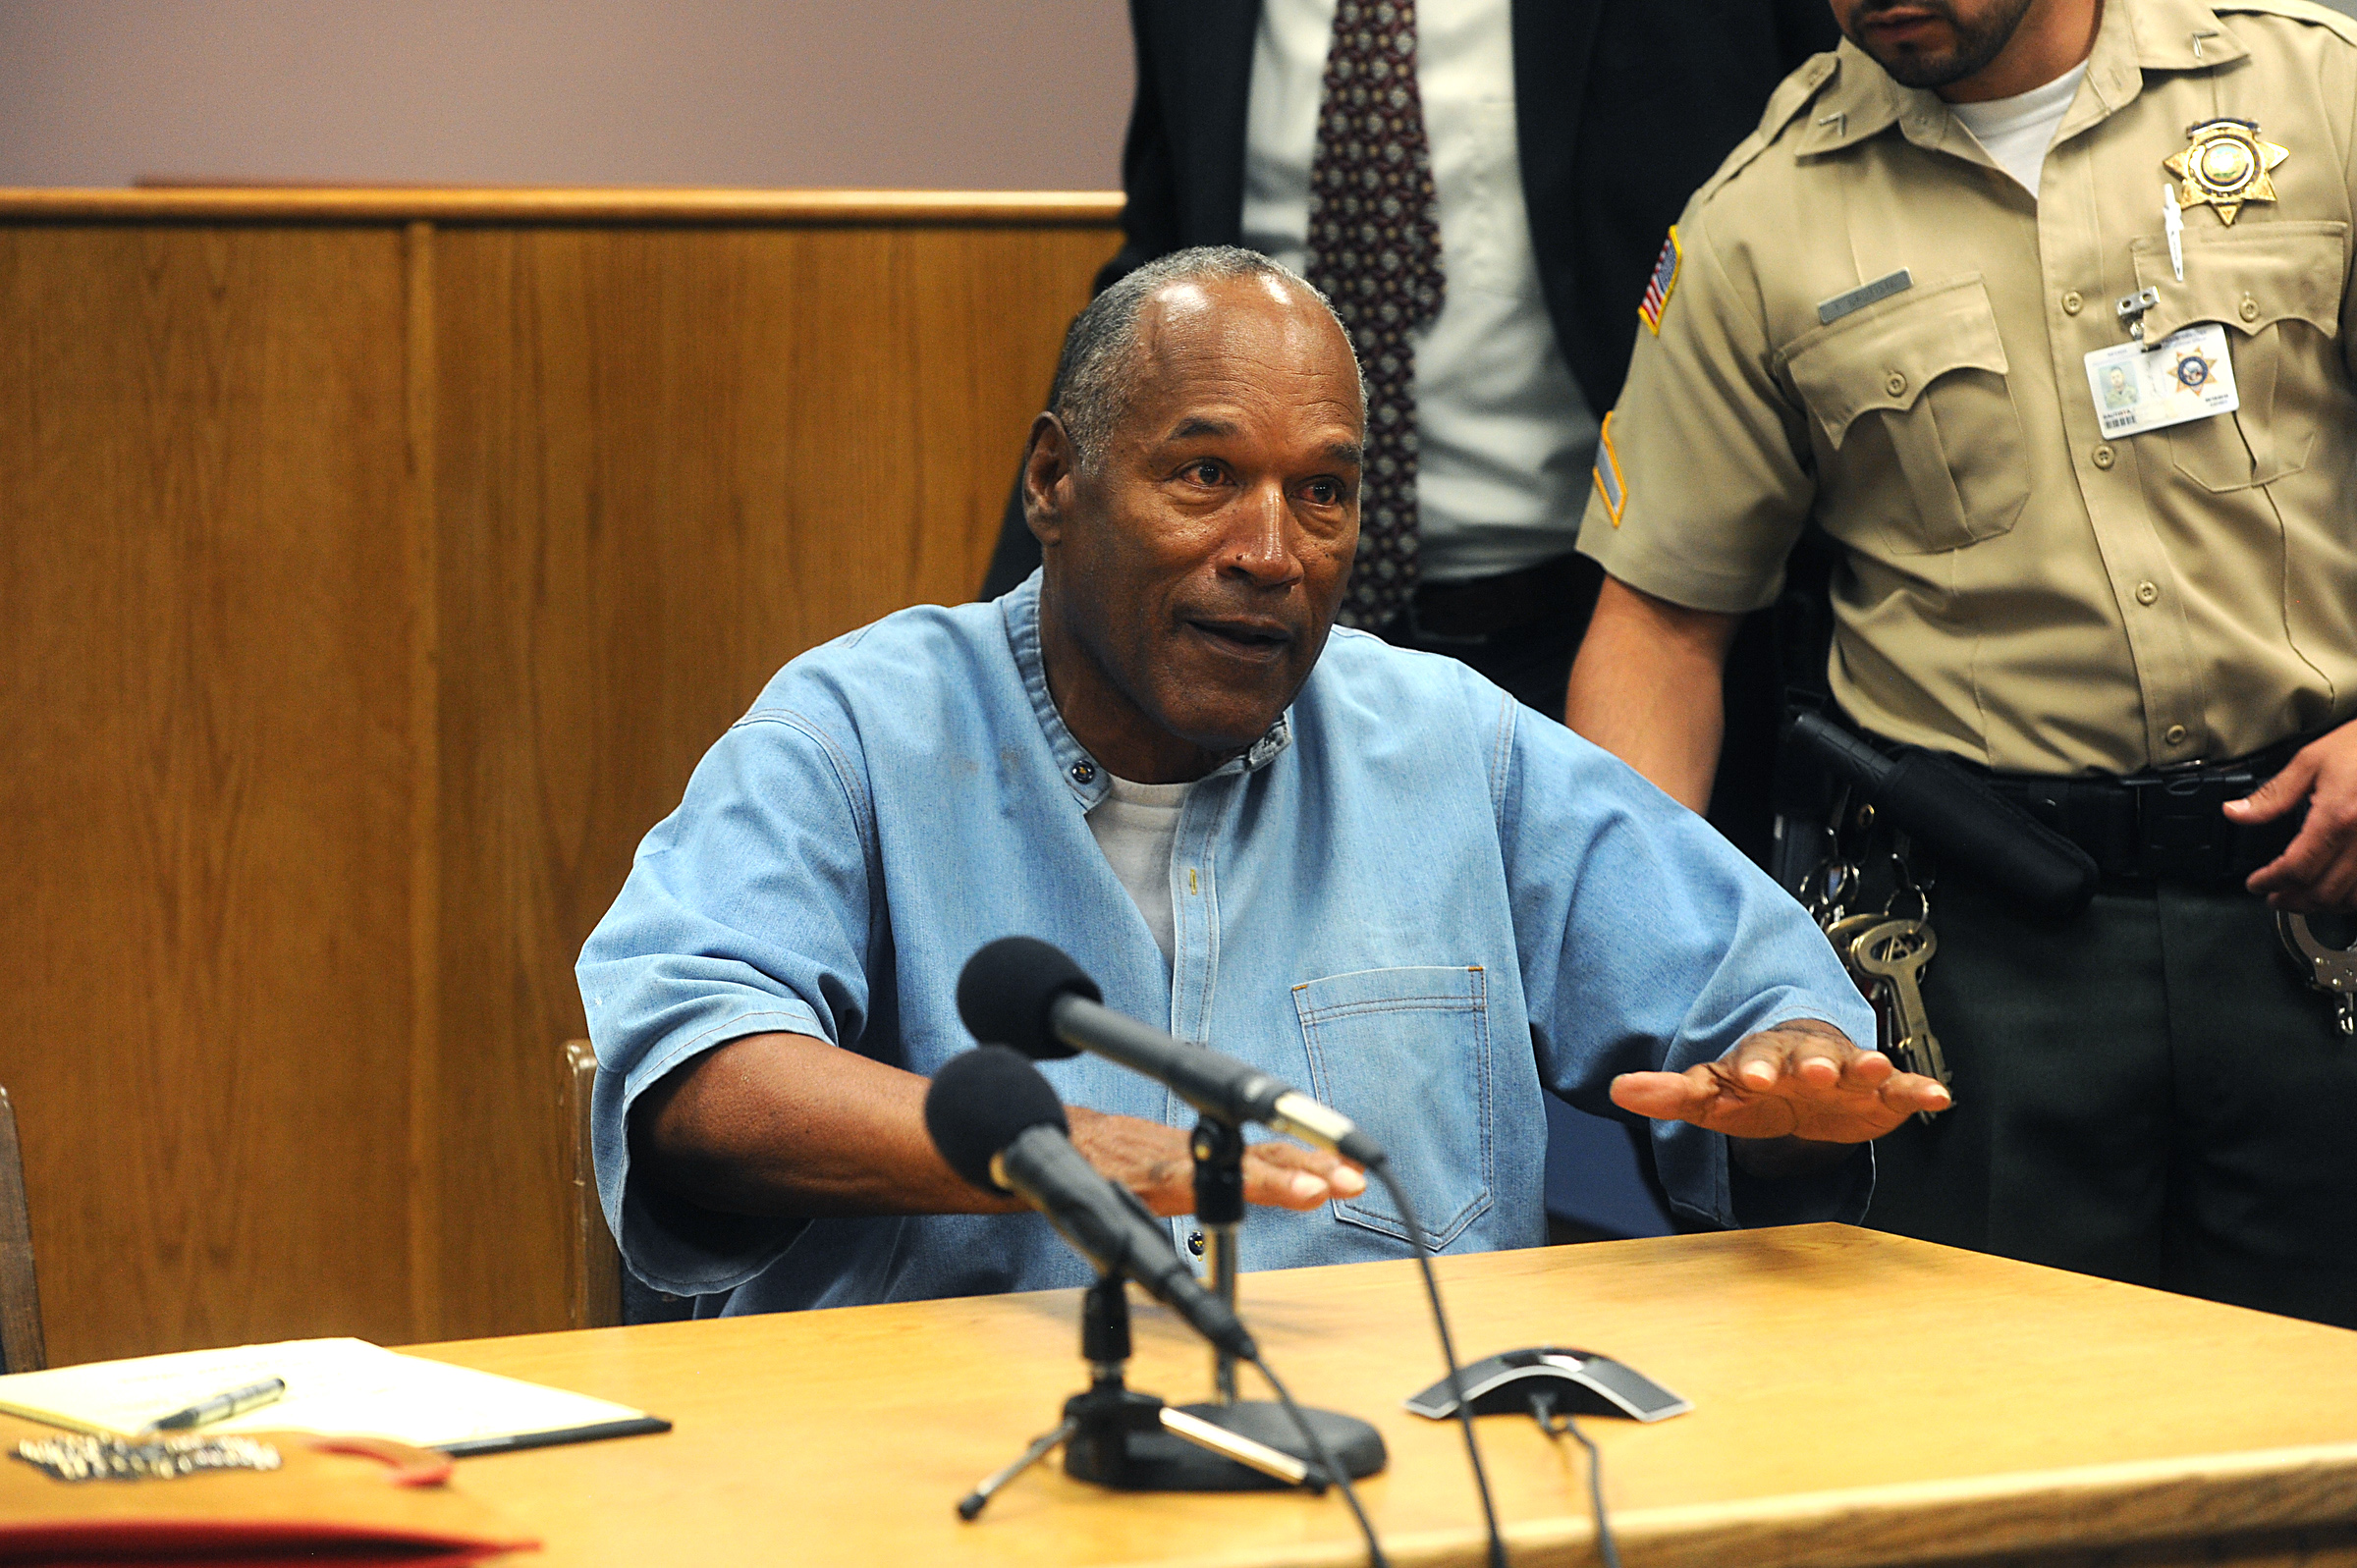 LOVELOCK, NV - JULY 20: O.J. Simpson attends a parole hearing at Lovelock Correctional Center July 20, 2017 in Lovelock, Nevada. Simpson is serving a nine to 33 year prison term for a 2007 armed robbery and kidnapping conviction. Jason Bean-Pool/Getty Images